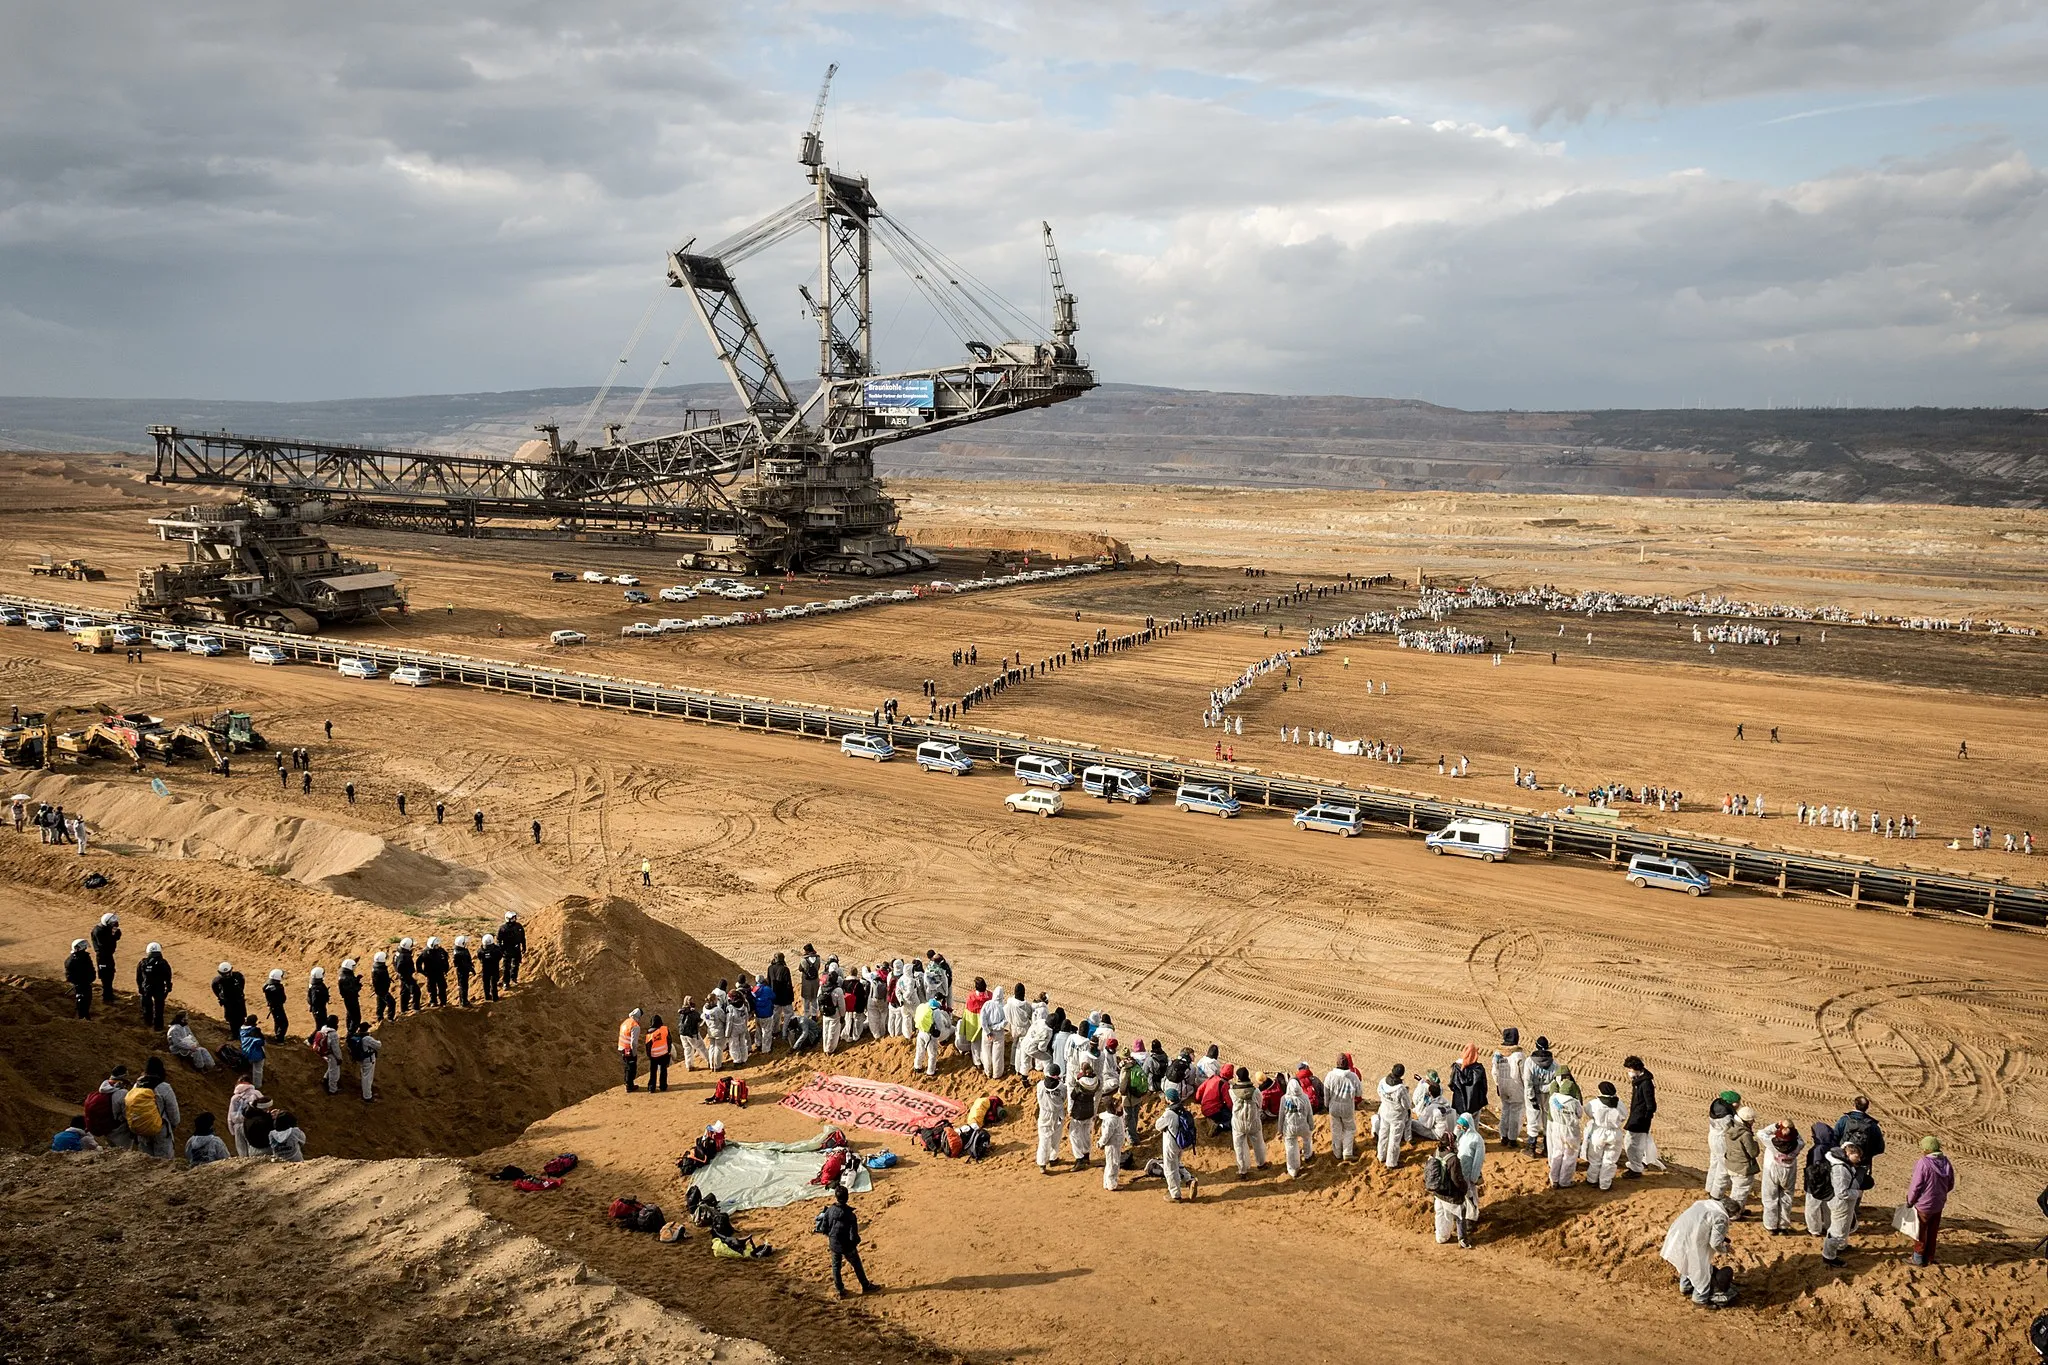 Photo showing: On November 5, 2017, at the beginning of COP 23, the activist organization Attac and the alliance Ende Gelände demonstrated against lignite-fired power generation in the Rhenish lignite mining district not far from Bonn.
After the rally with several thousand people, about 600 people invaded the open pit Hambach.

The operator had to stop two bucket-wheel excavators.